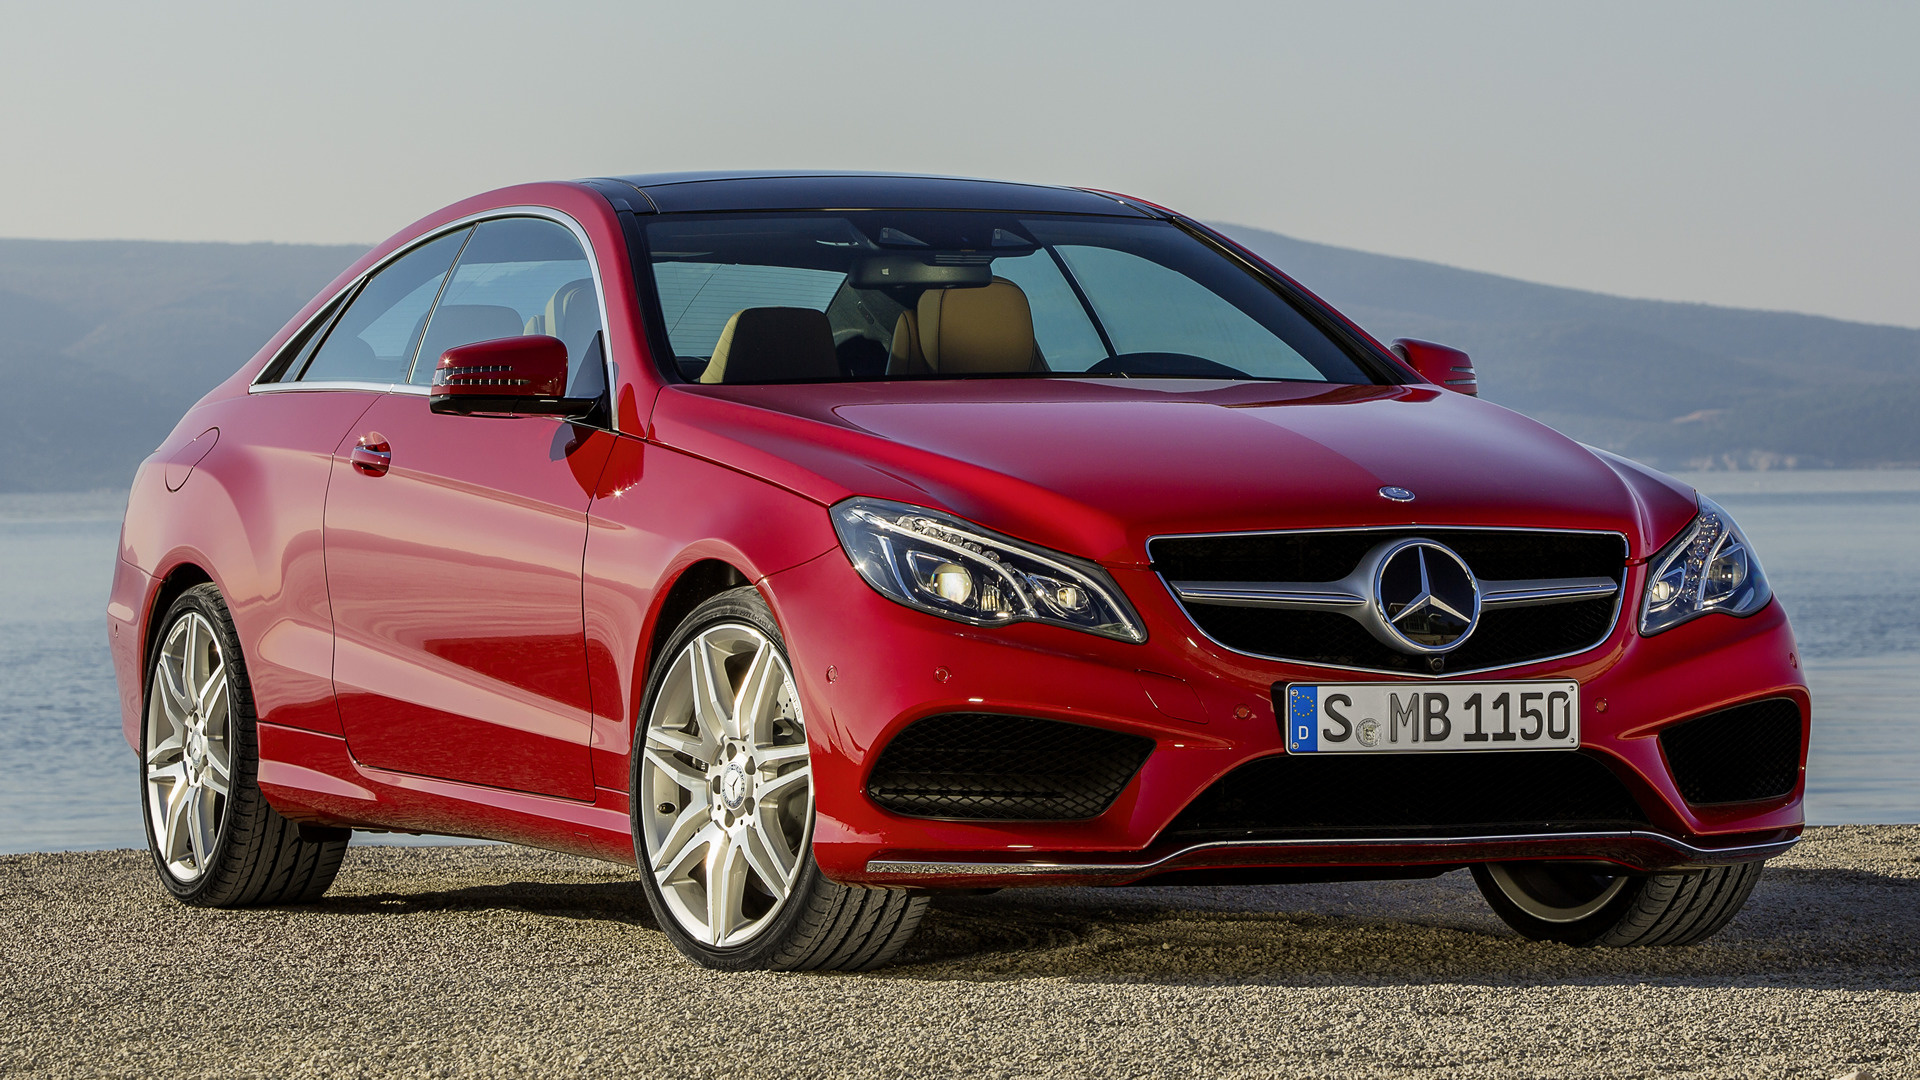 Mercedes-Benz E 400 4Matic Coupe Amg Styling Wallpapers